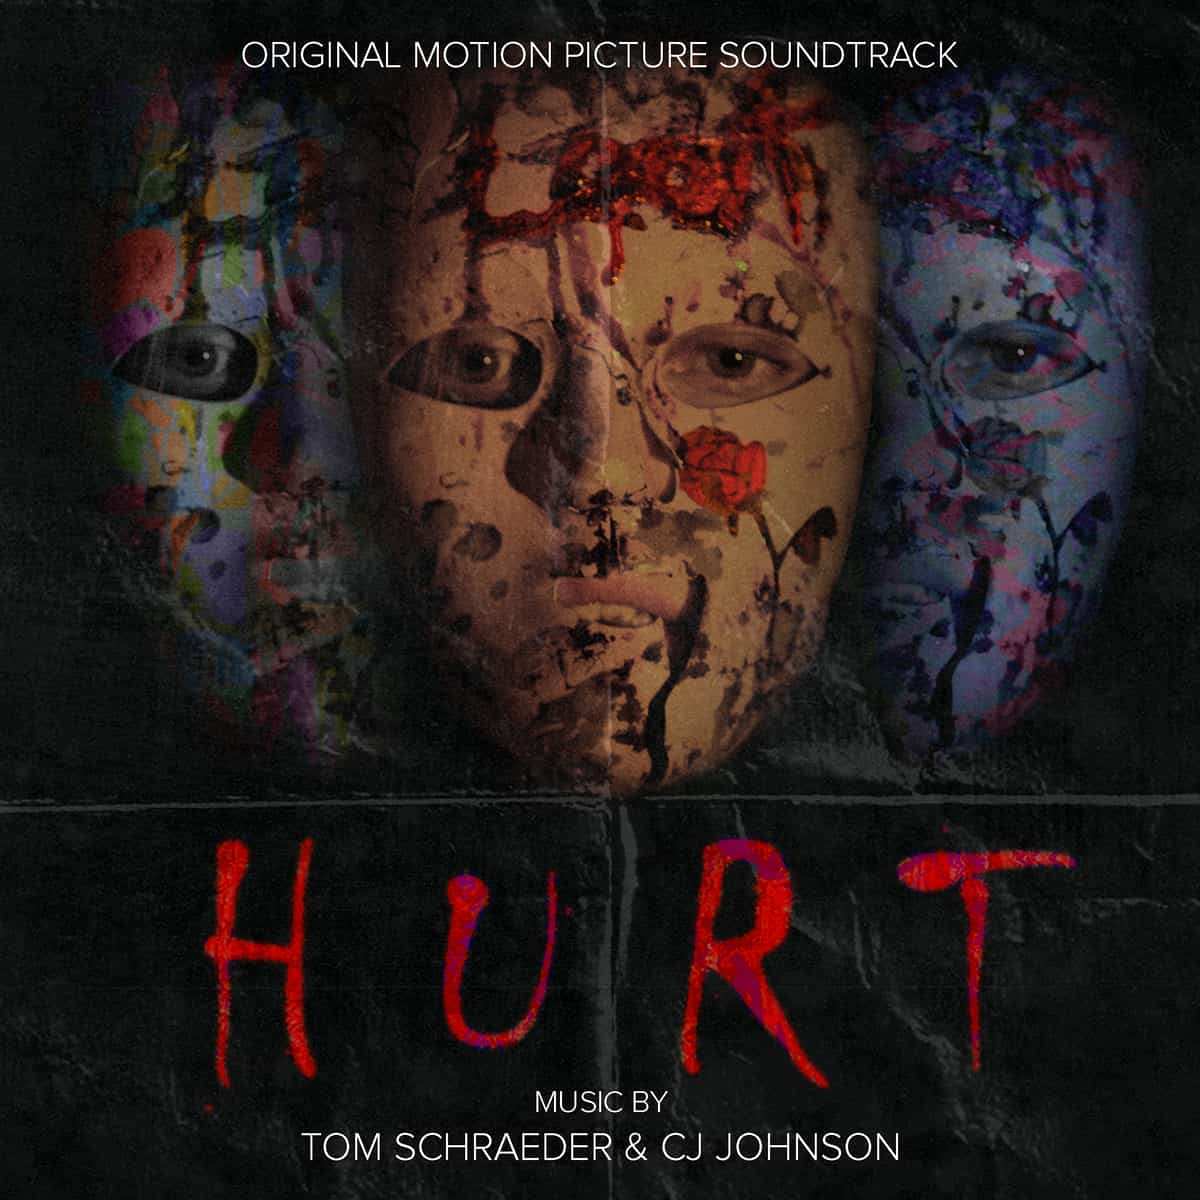 Hurt Album Cover Art, Three Damaged, Masked Faces Look On